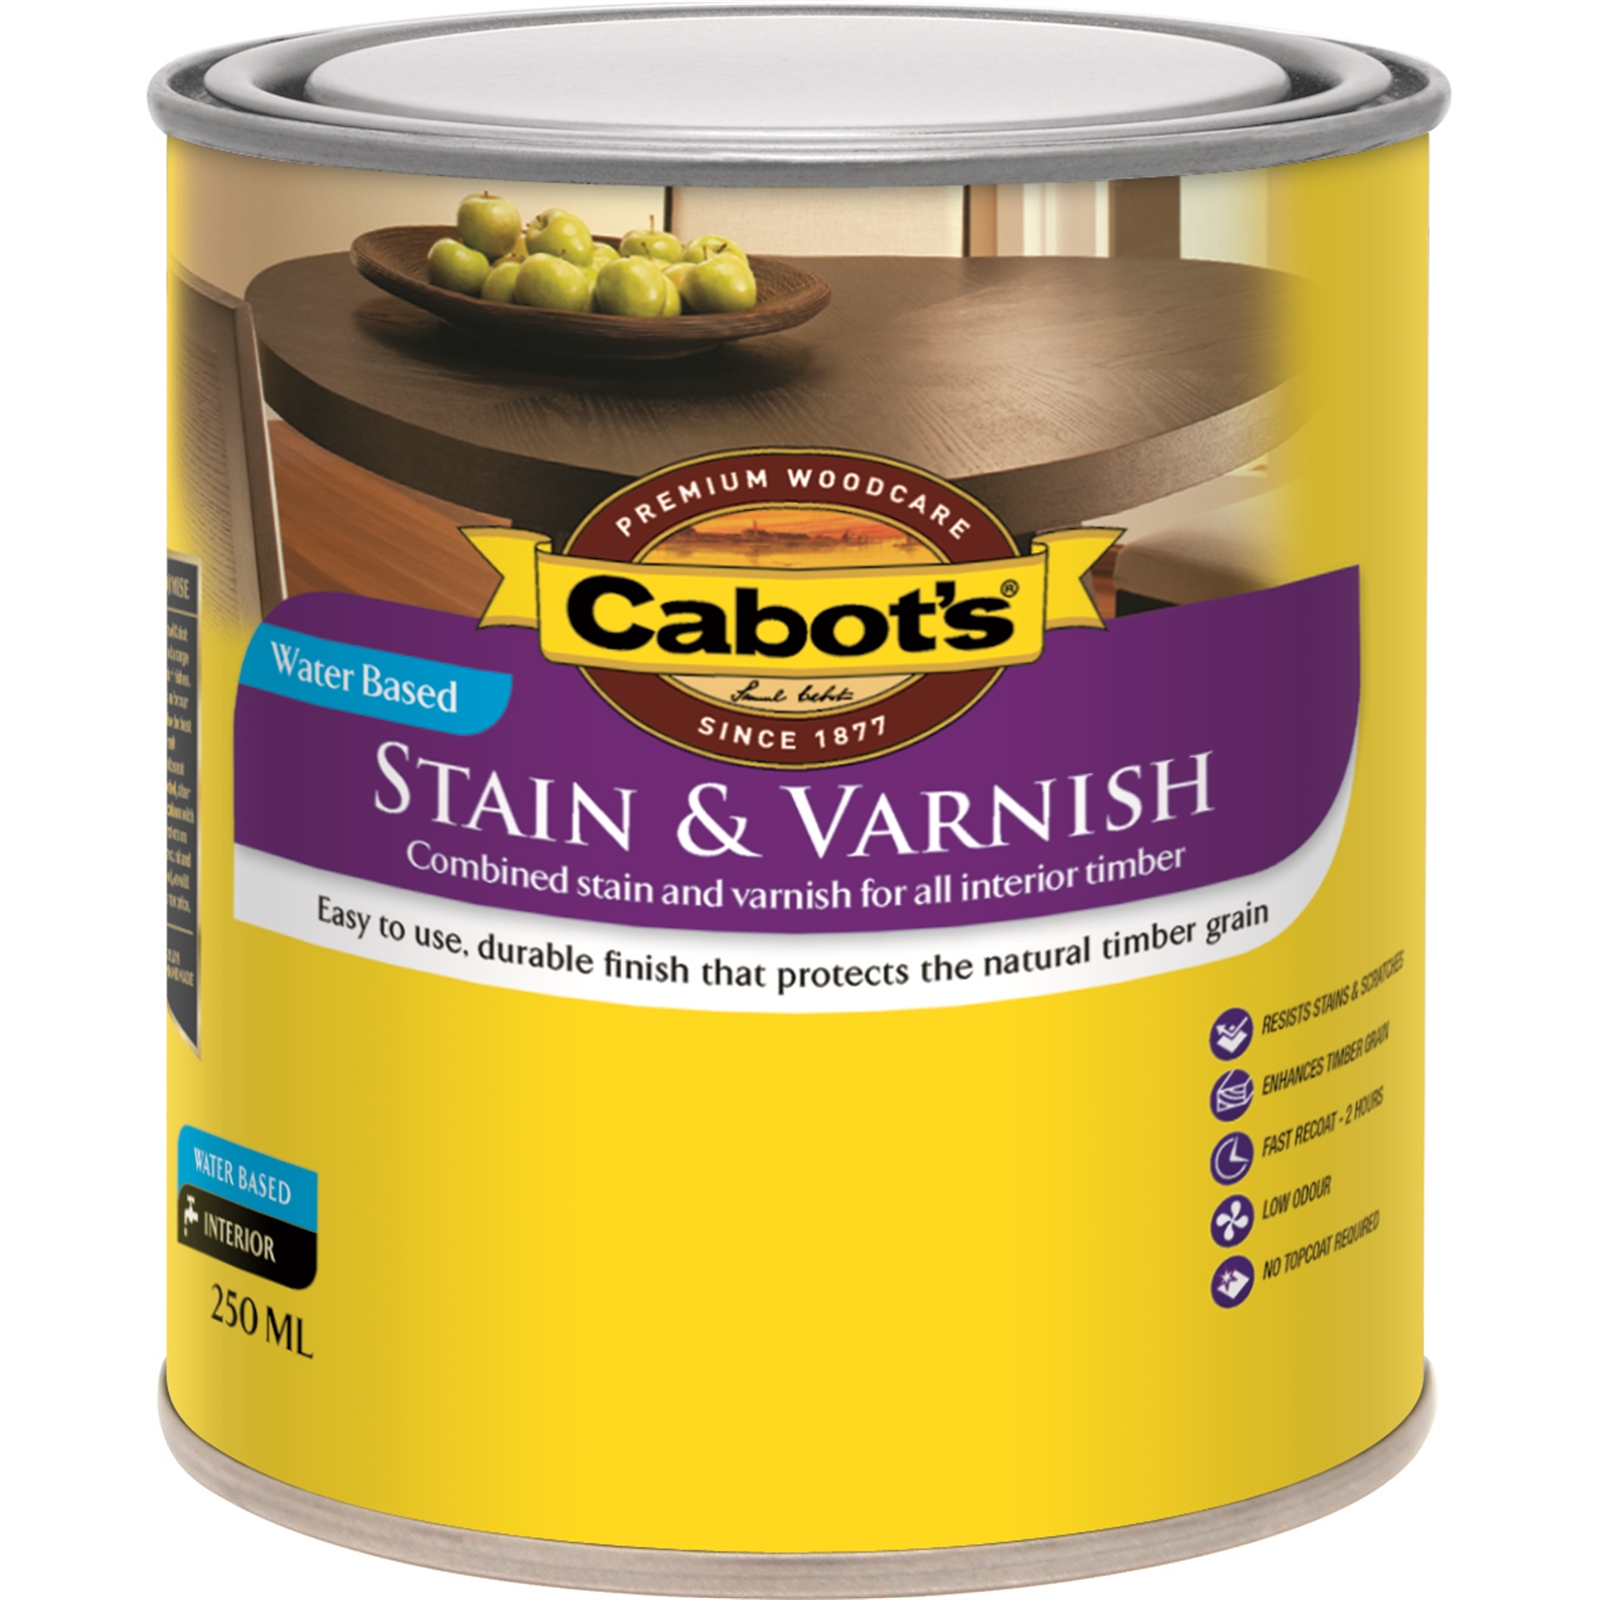 Cabot's 250ml Satin Walnut Water Based Stain and Varnish